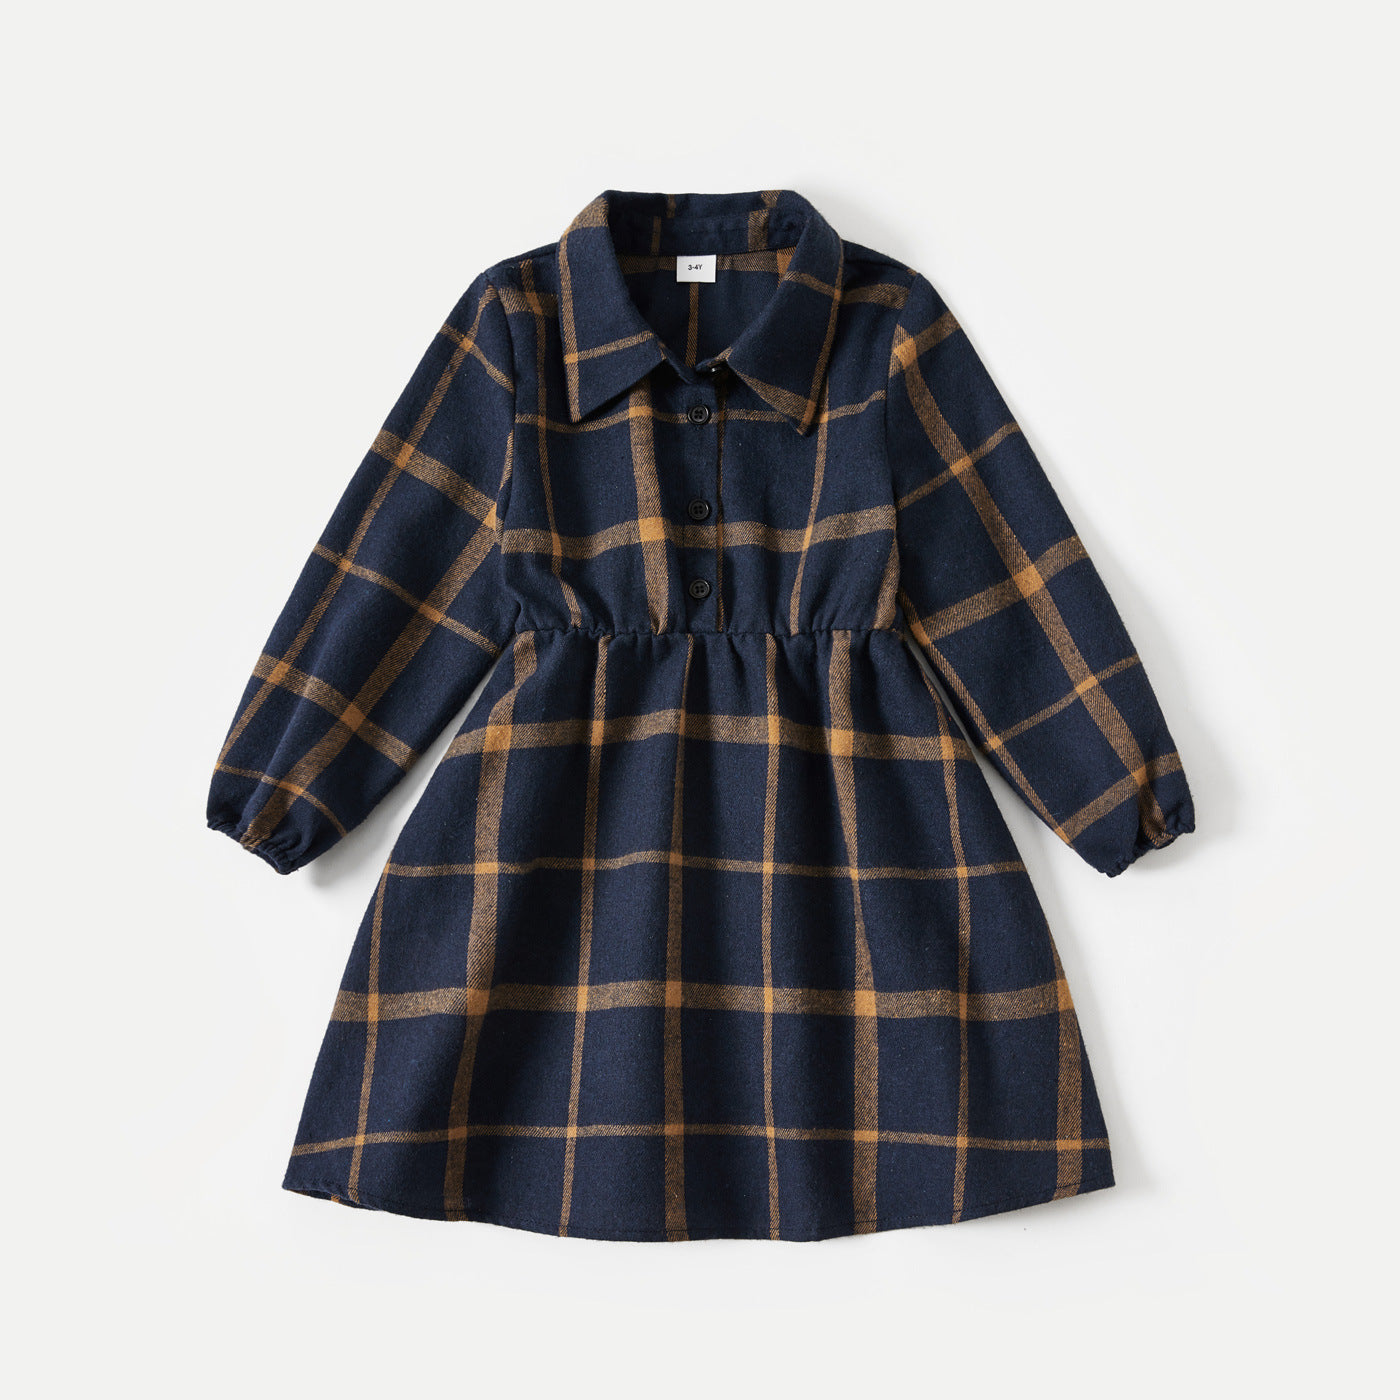 Family Matching Plaid Print Blue Long-sleeve Family Dresses and Shirts Sets